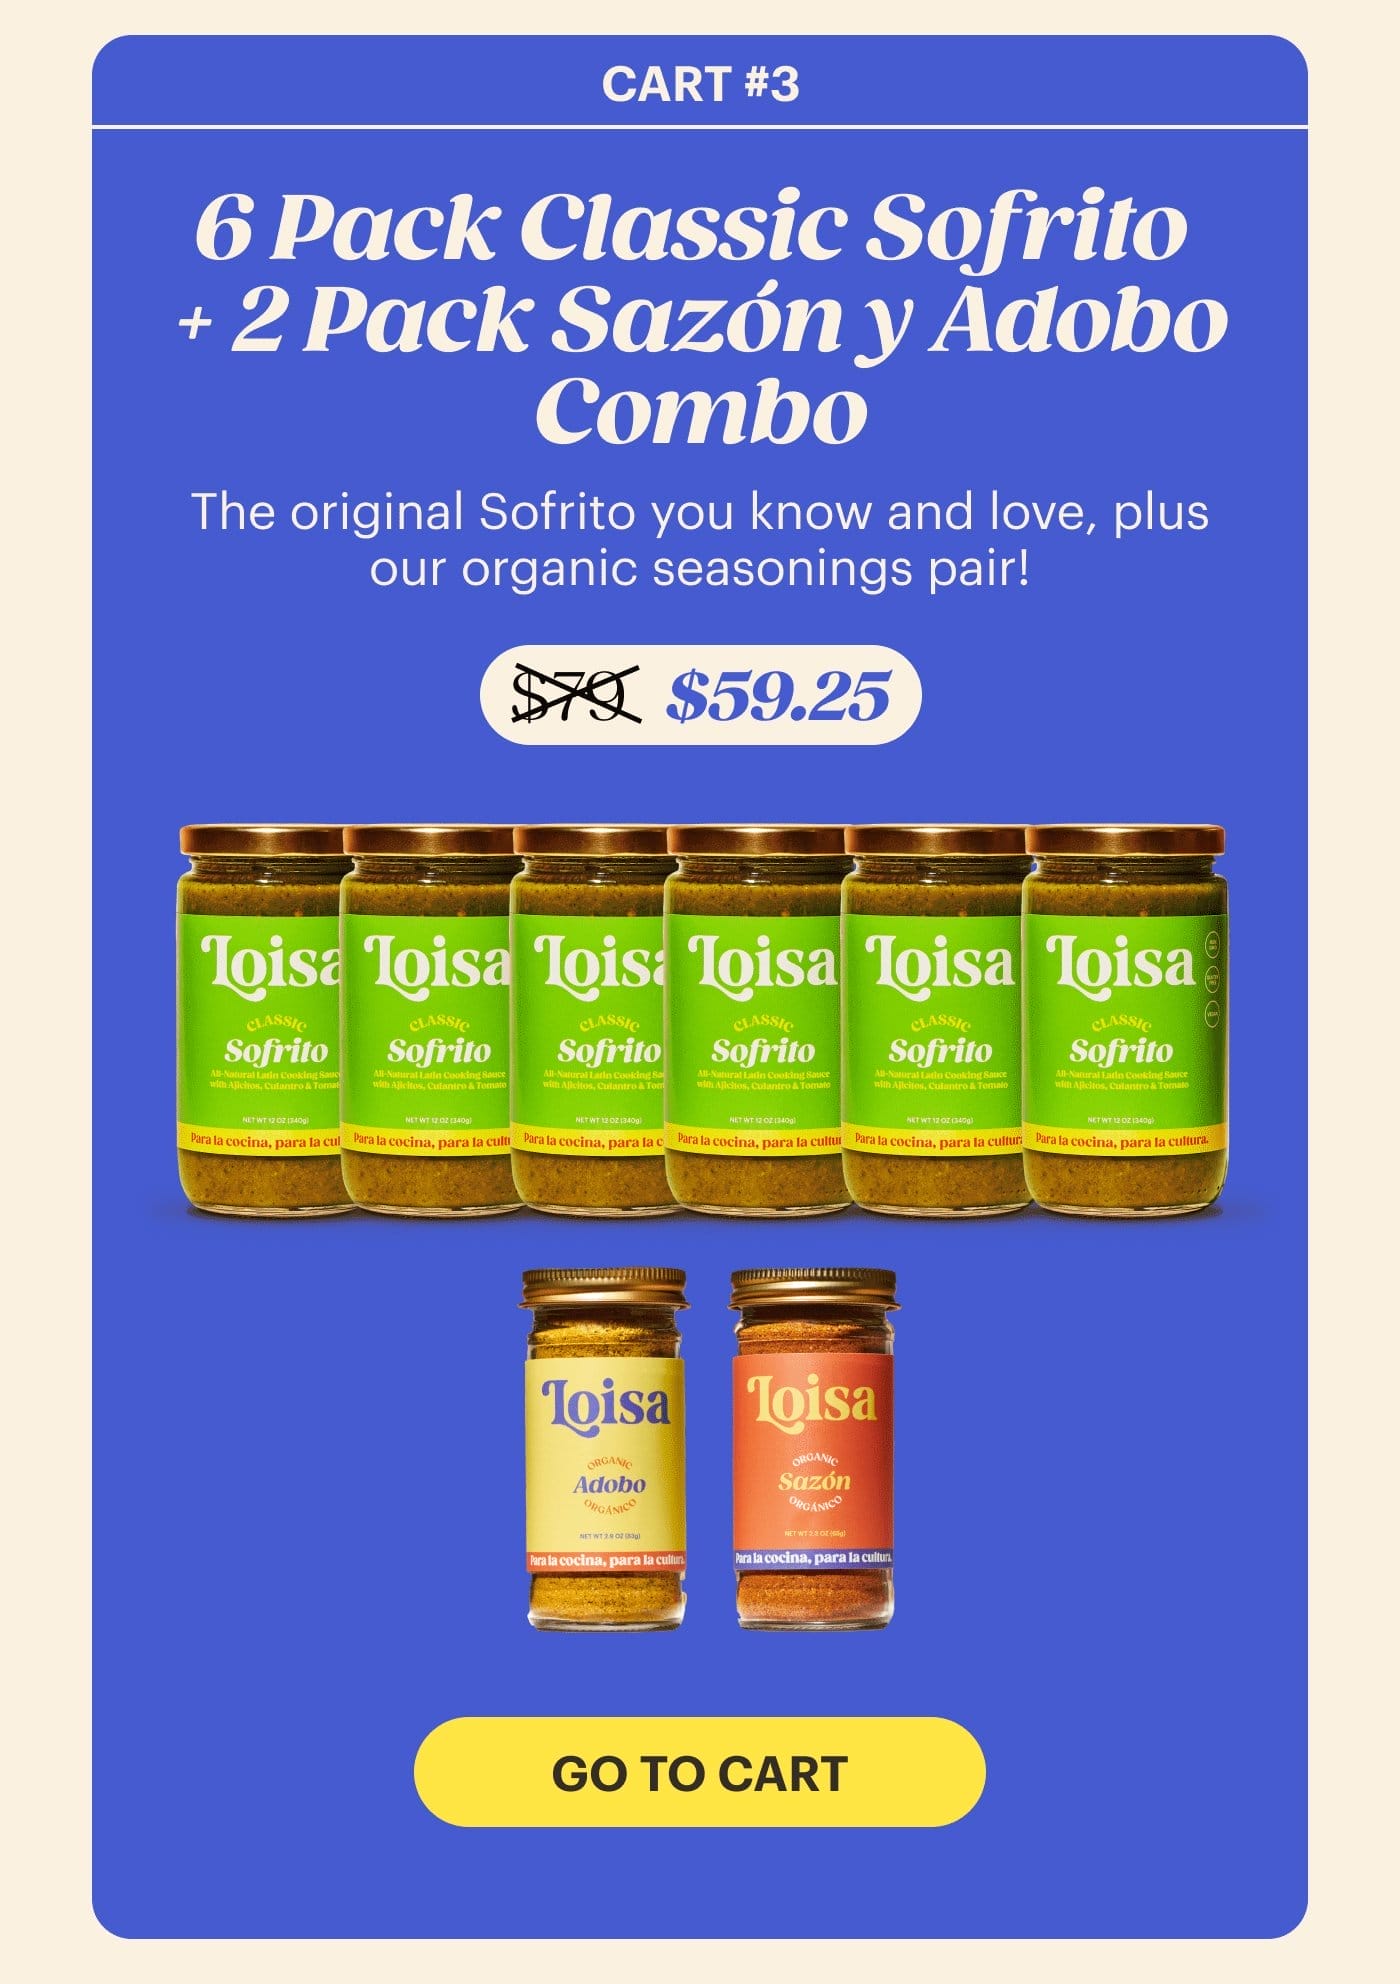 6 Pack Classic Sofrito + 2 Pack Sazón y Adobo Combo (\\$79 \\$59.25) GO TO CART